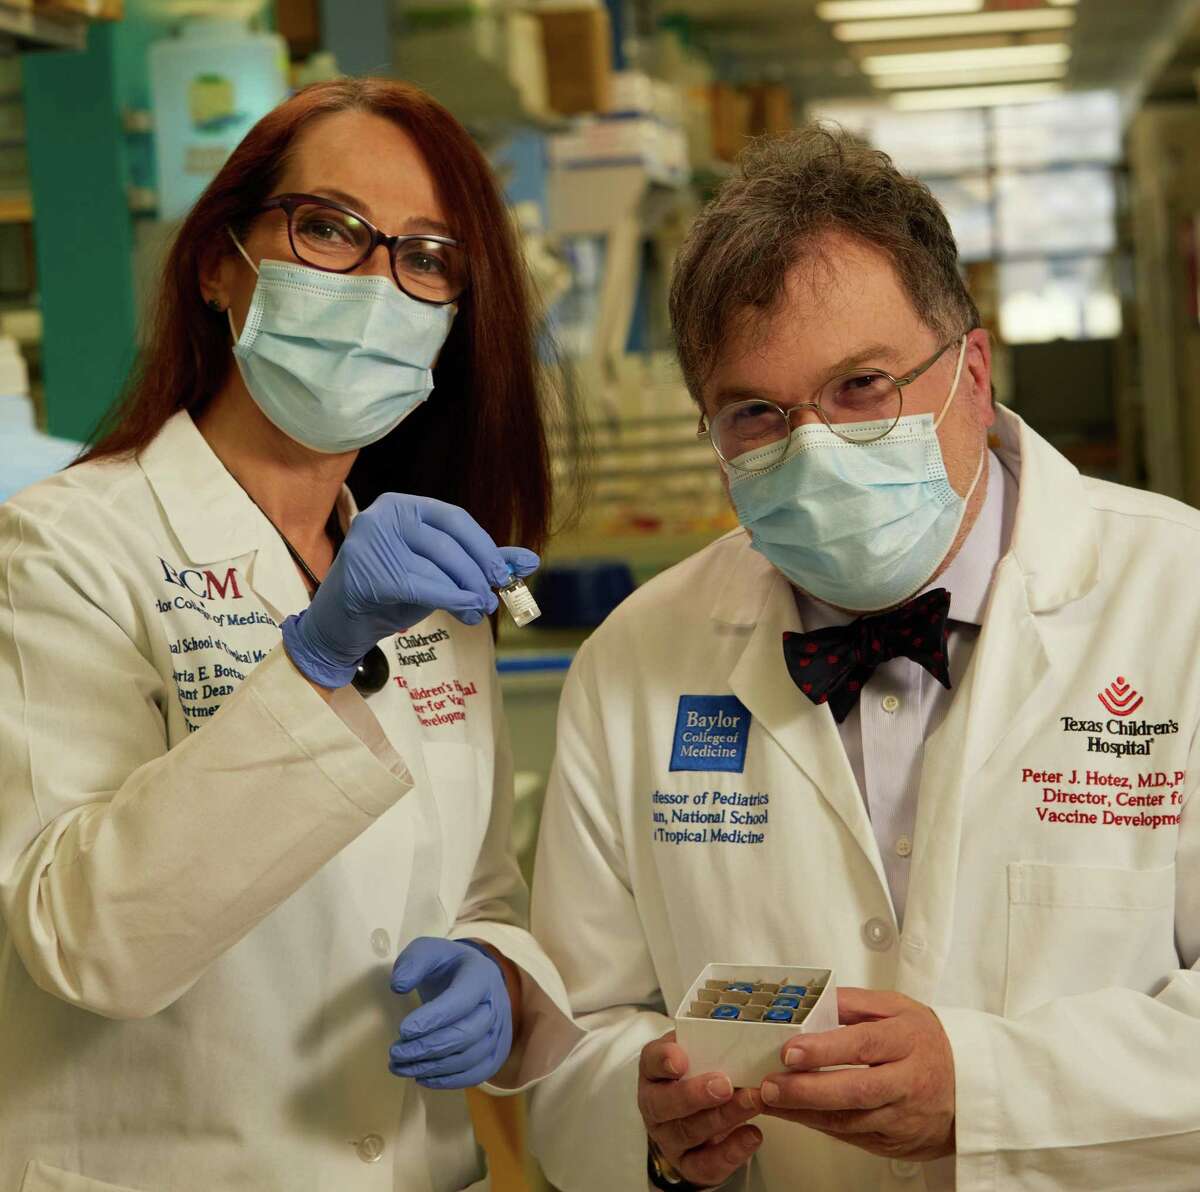 Drs. Maria Elena Bottazzi and Peter Hotez at the Center for Vaccine Development; copyright 2021 Texas Children’s Hospital. All rights reserved.